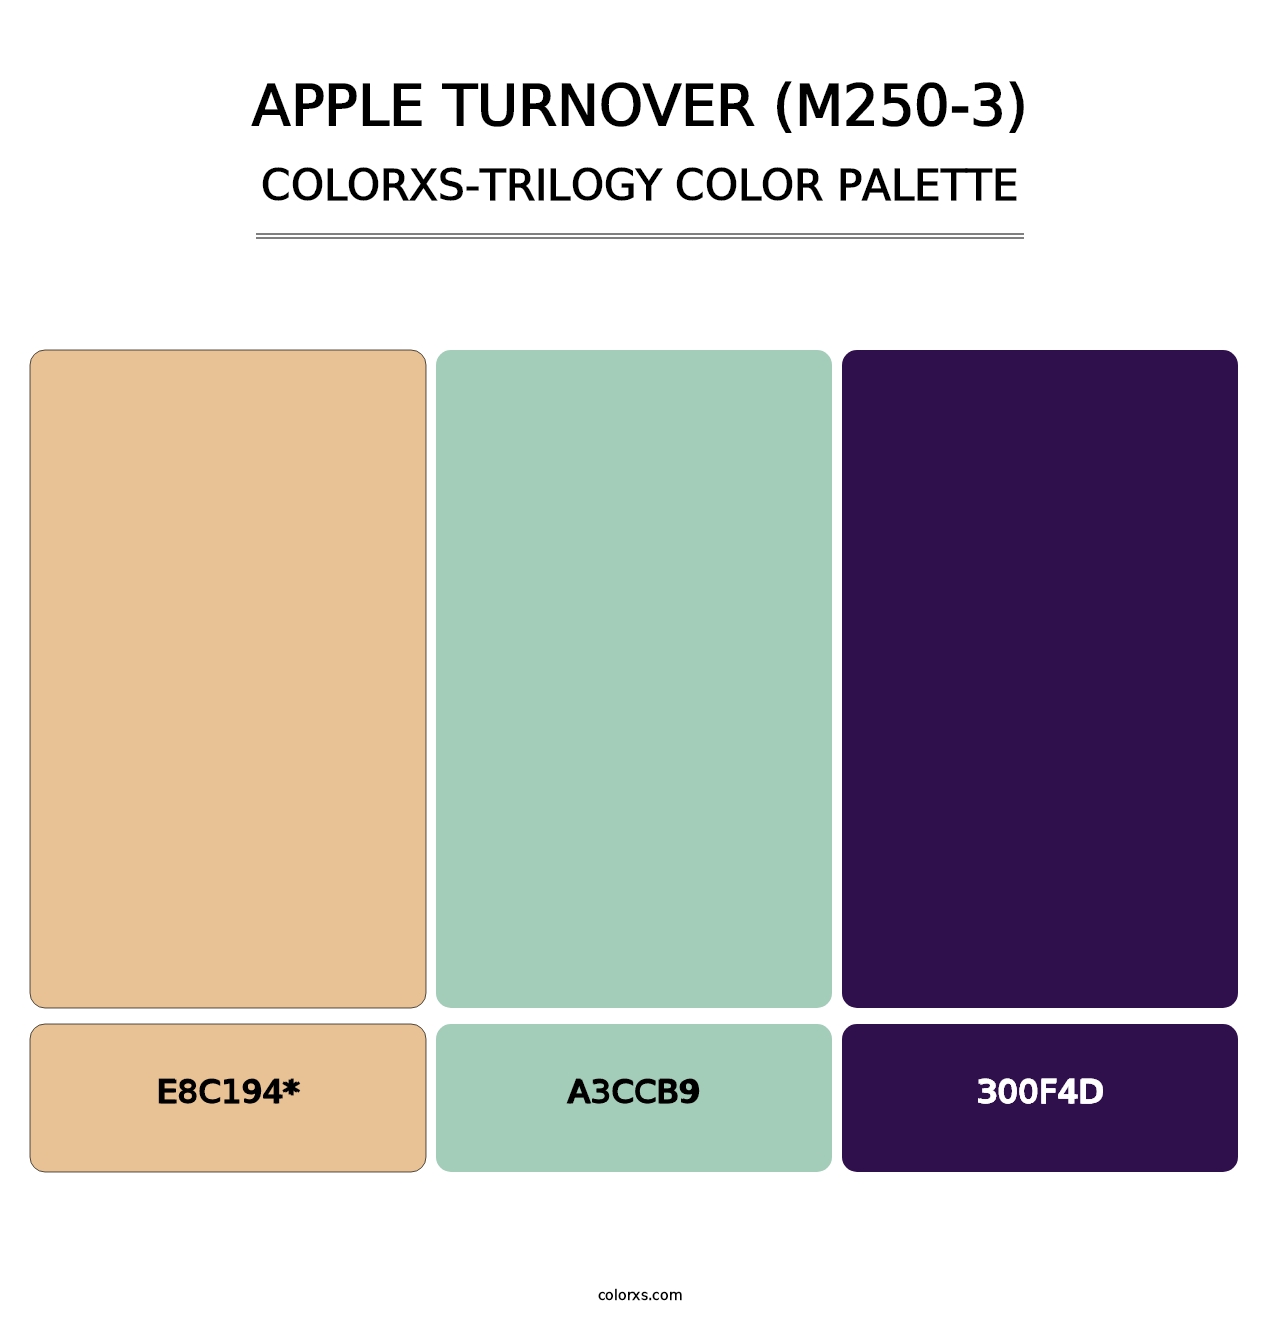 Apple Turnover (M250-3) - Colorxs Trilogy Palette